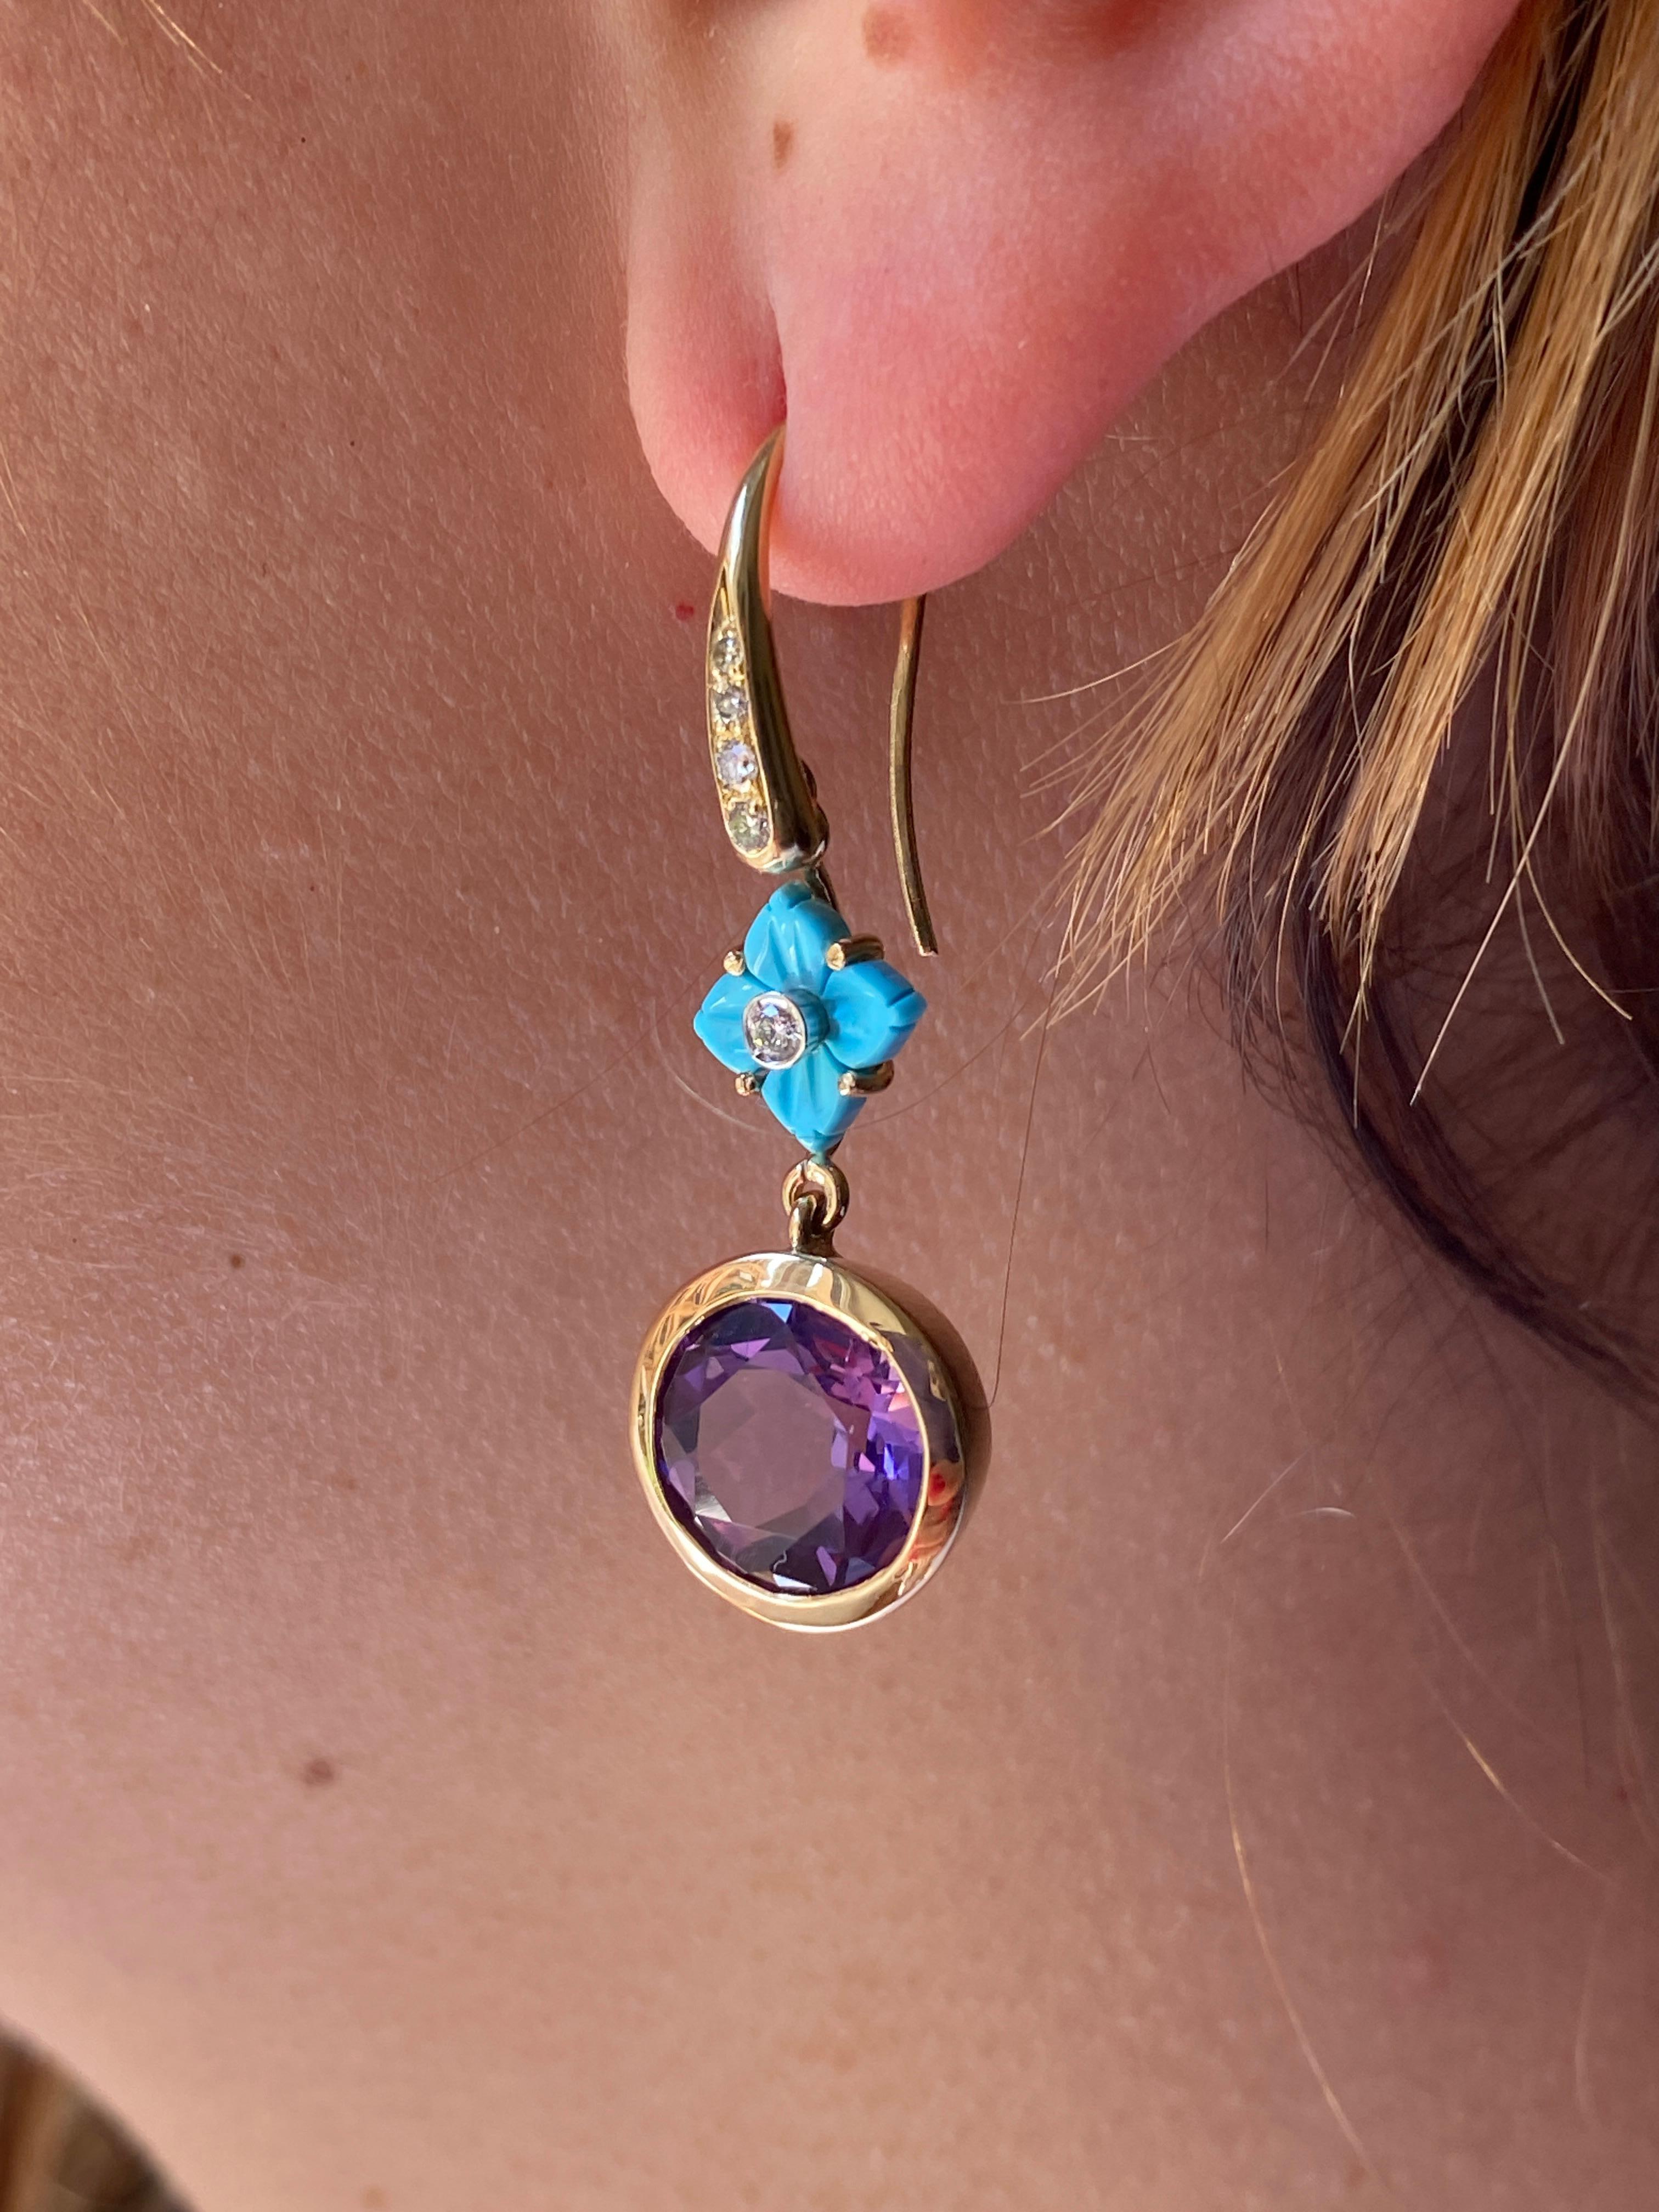 Unique 18k Gold Earrings Turquoise Flower Amethyst Diamonds Handcrafted in Italy For Sale 1